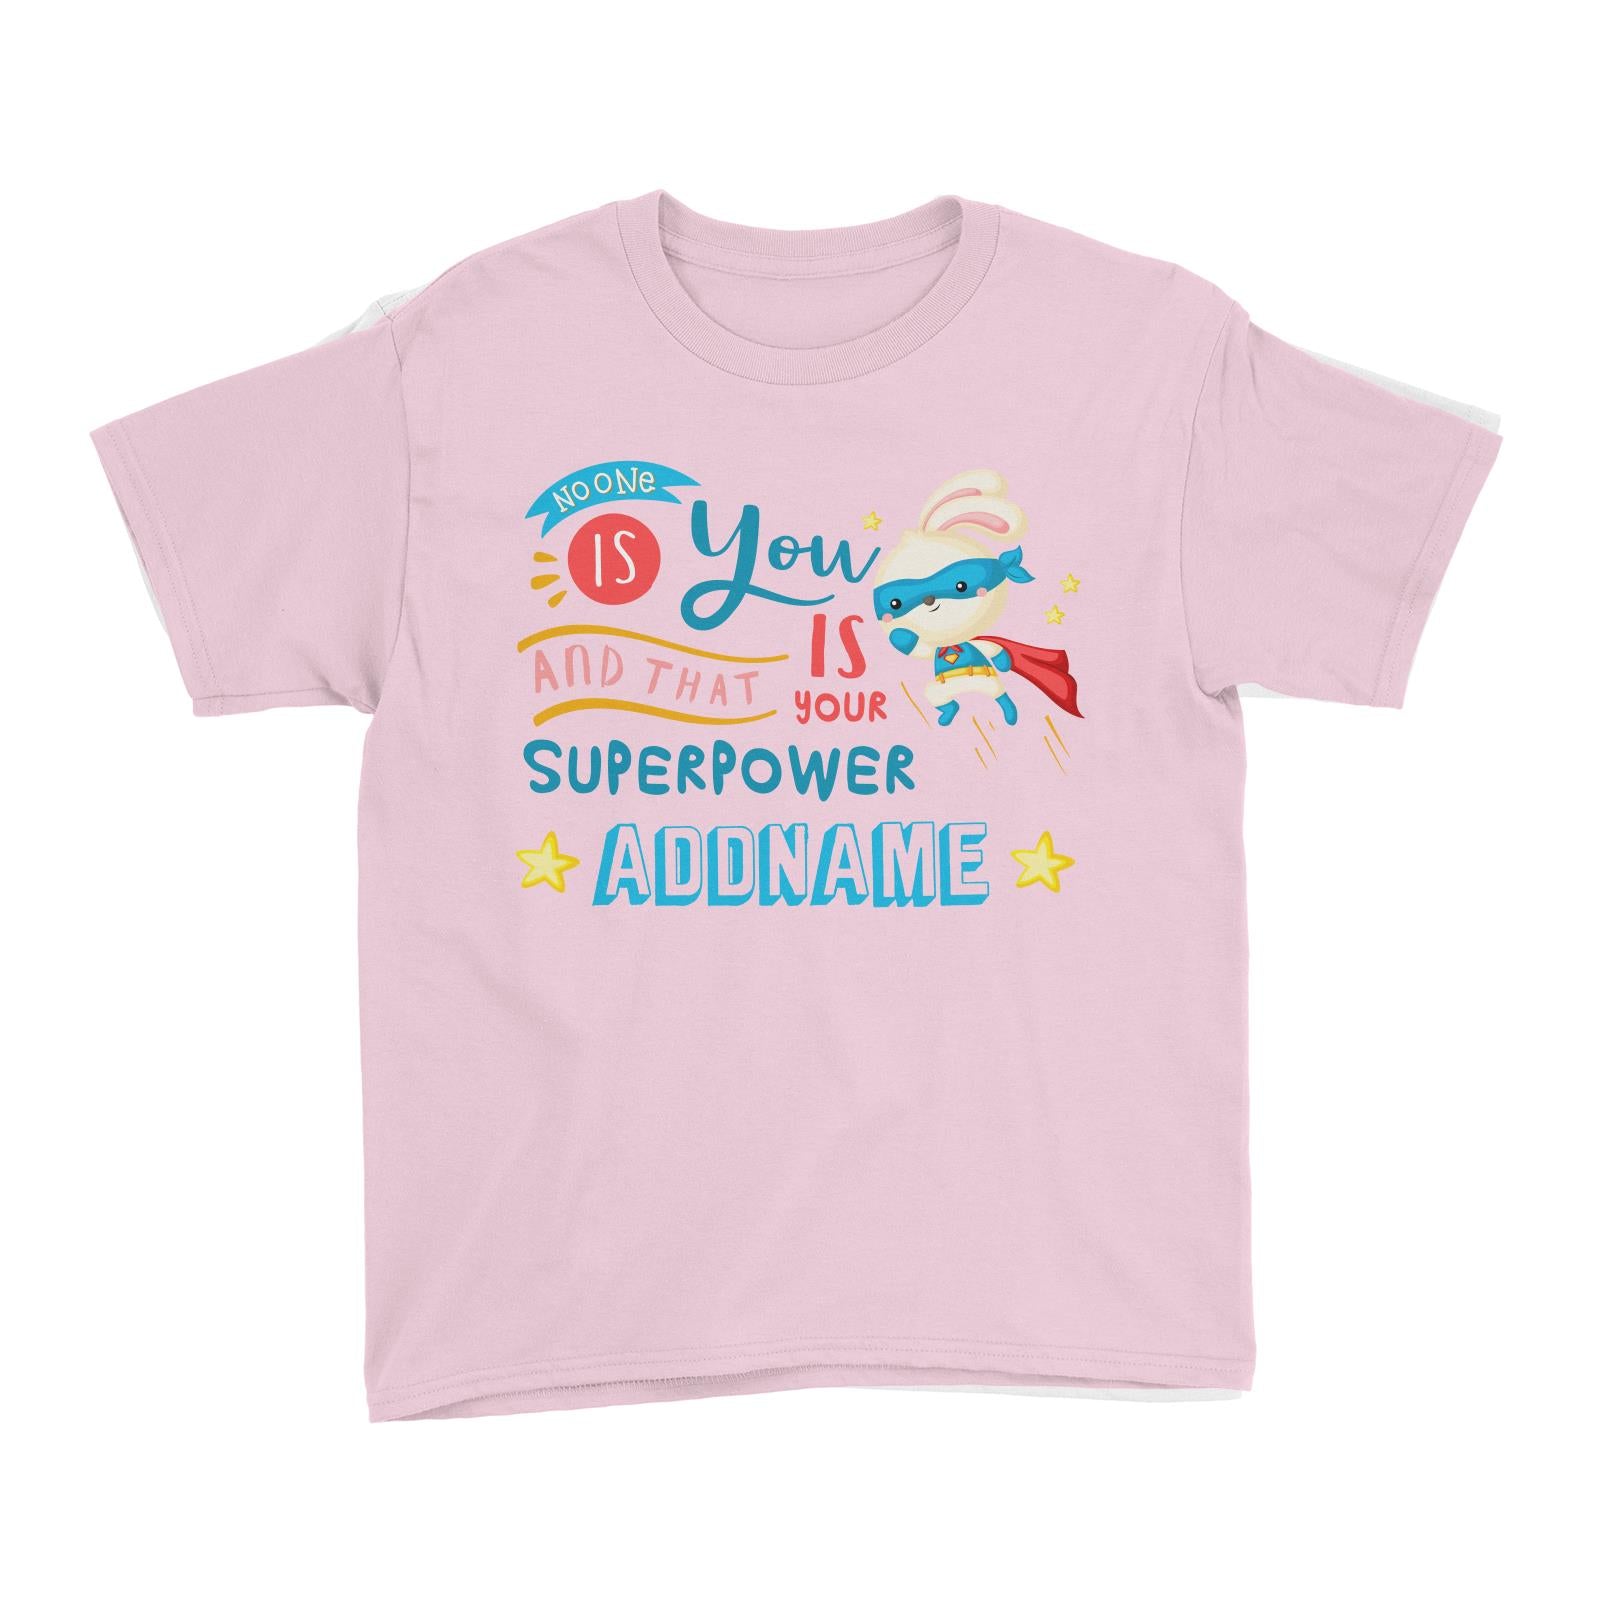 Children's Day Gift Series No One Is You And That Is Your Superpower Blue Addname Kid's T-Shirt